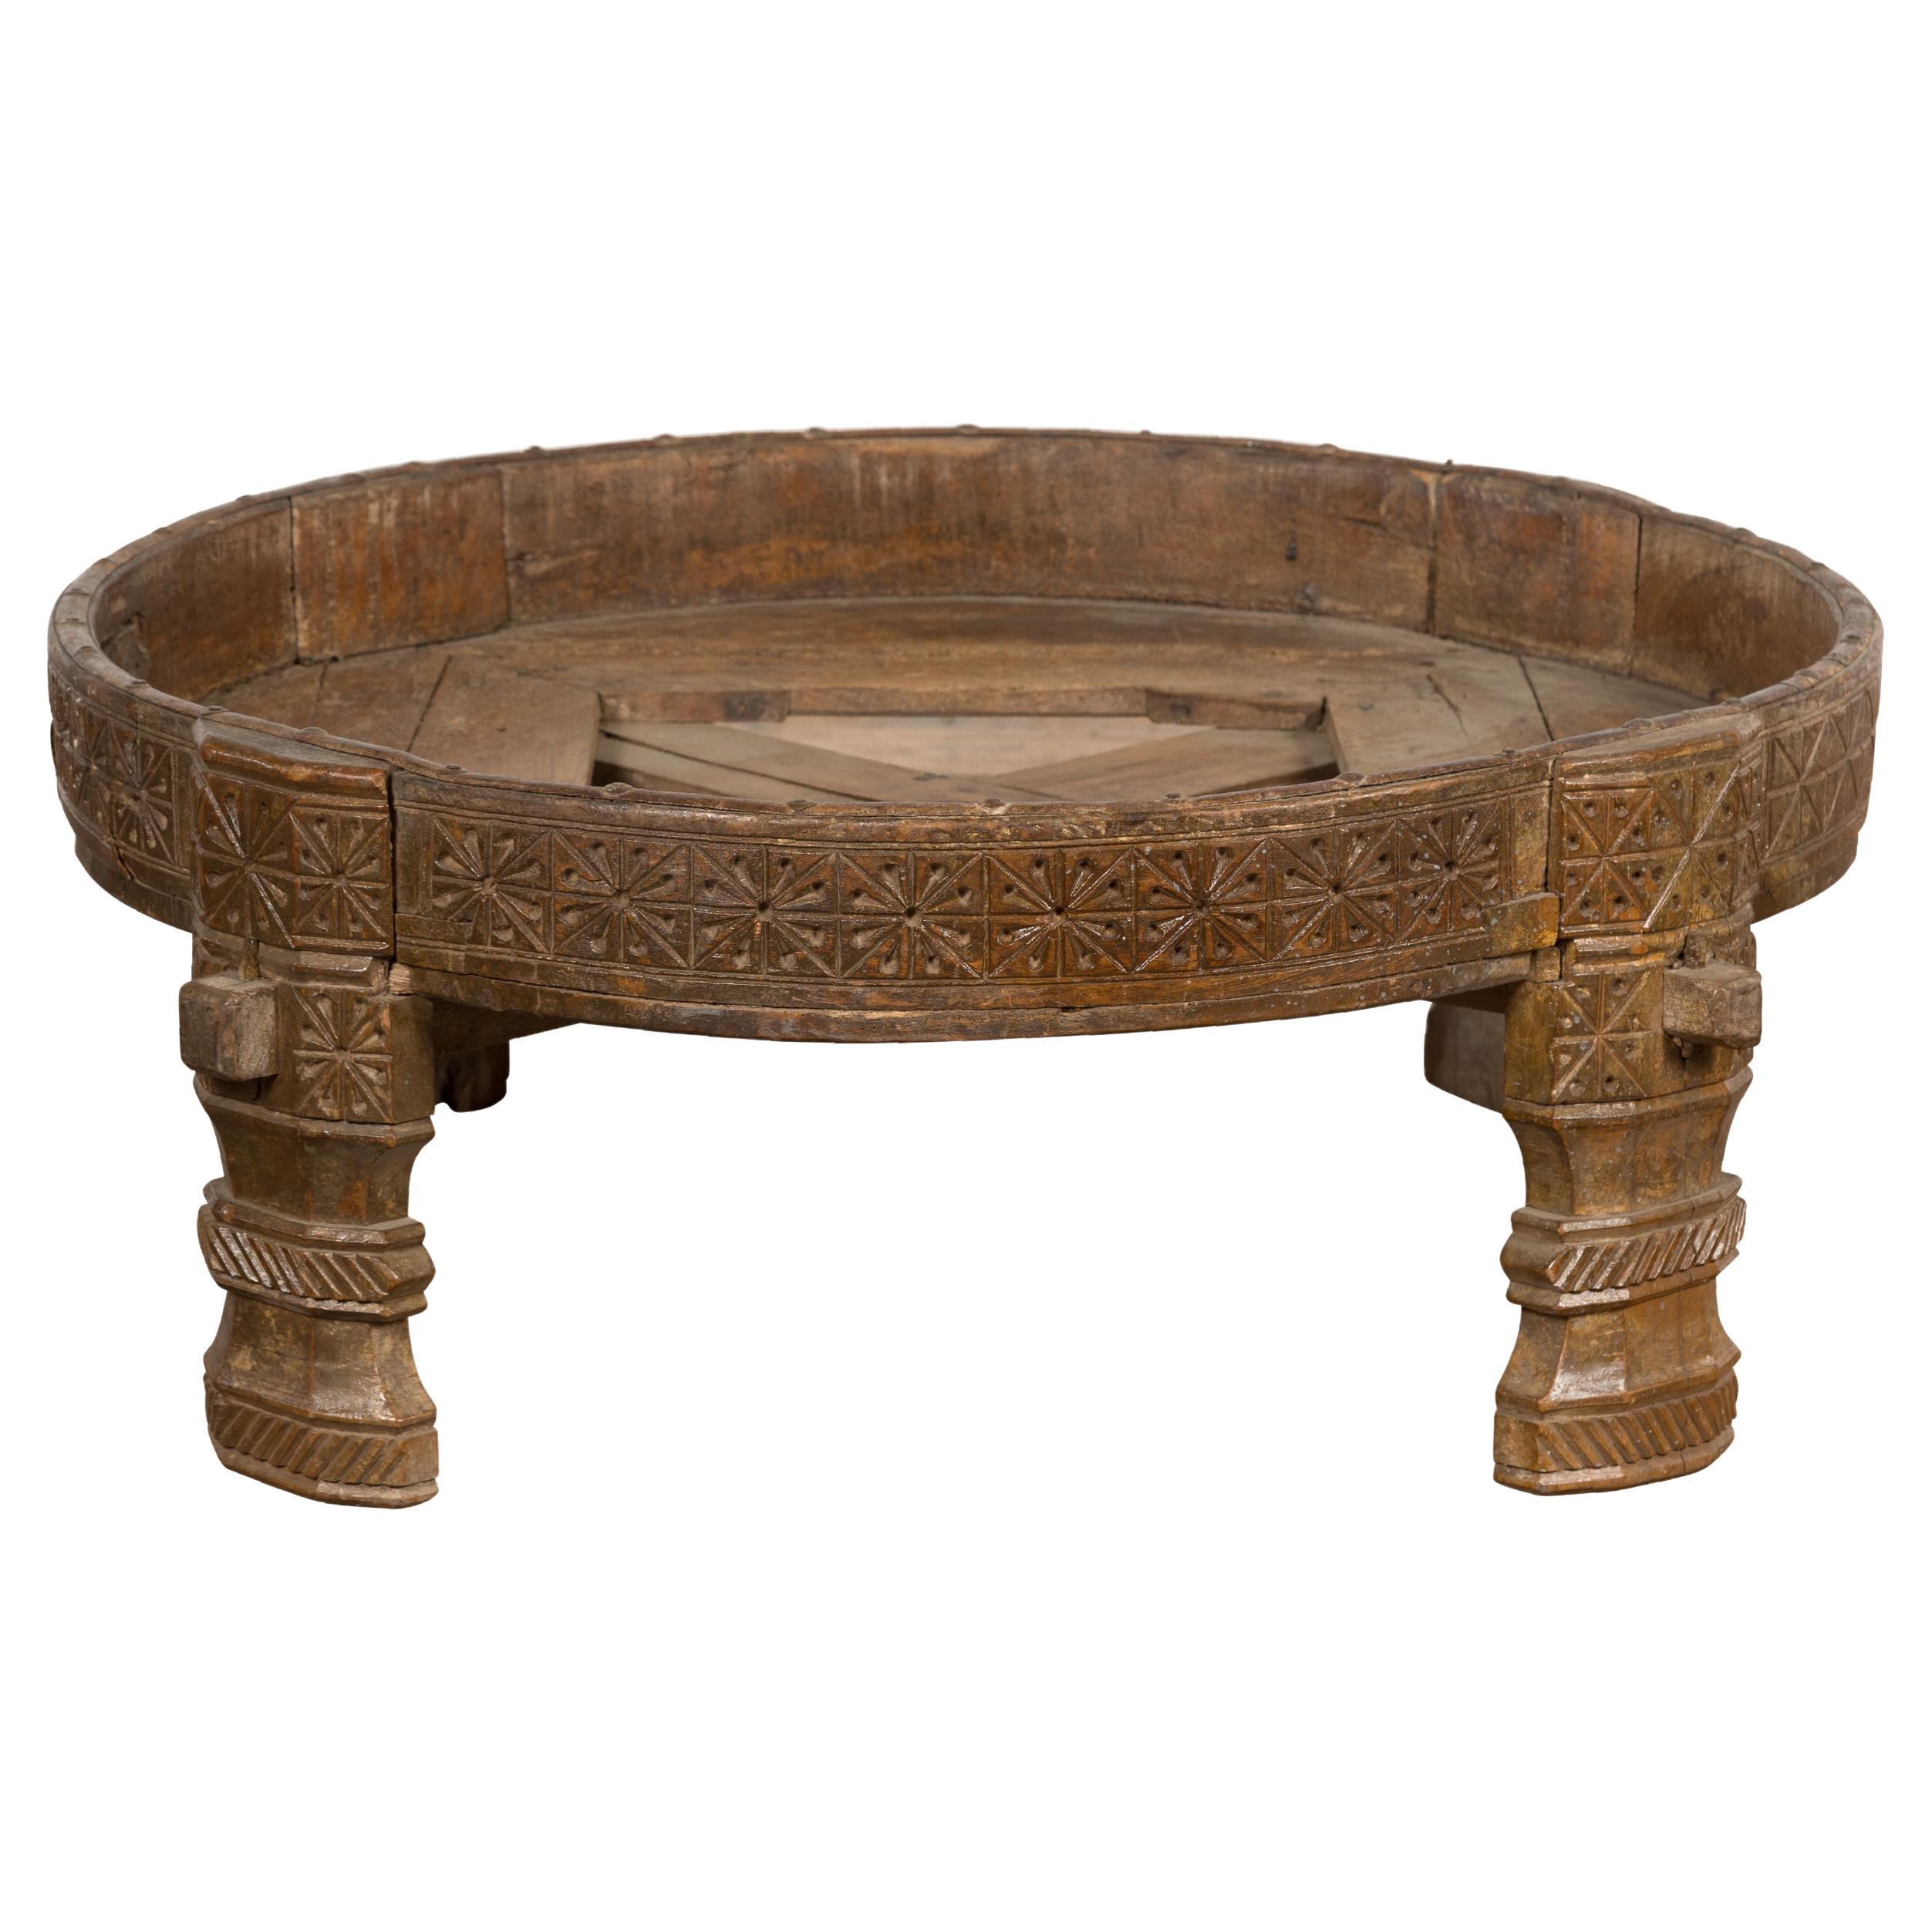 1920s Indian Antique Chakki Grinding Table with Hand-Carved Geometric Décor